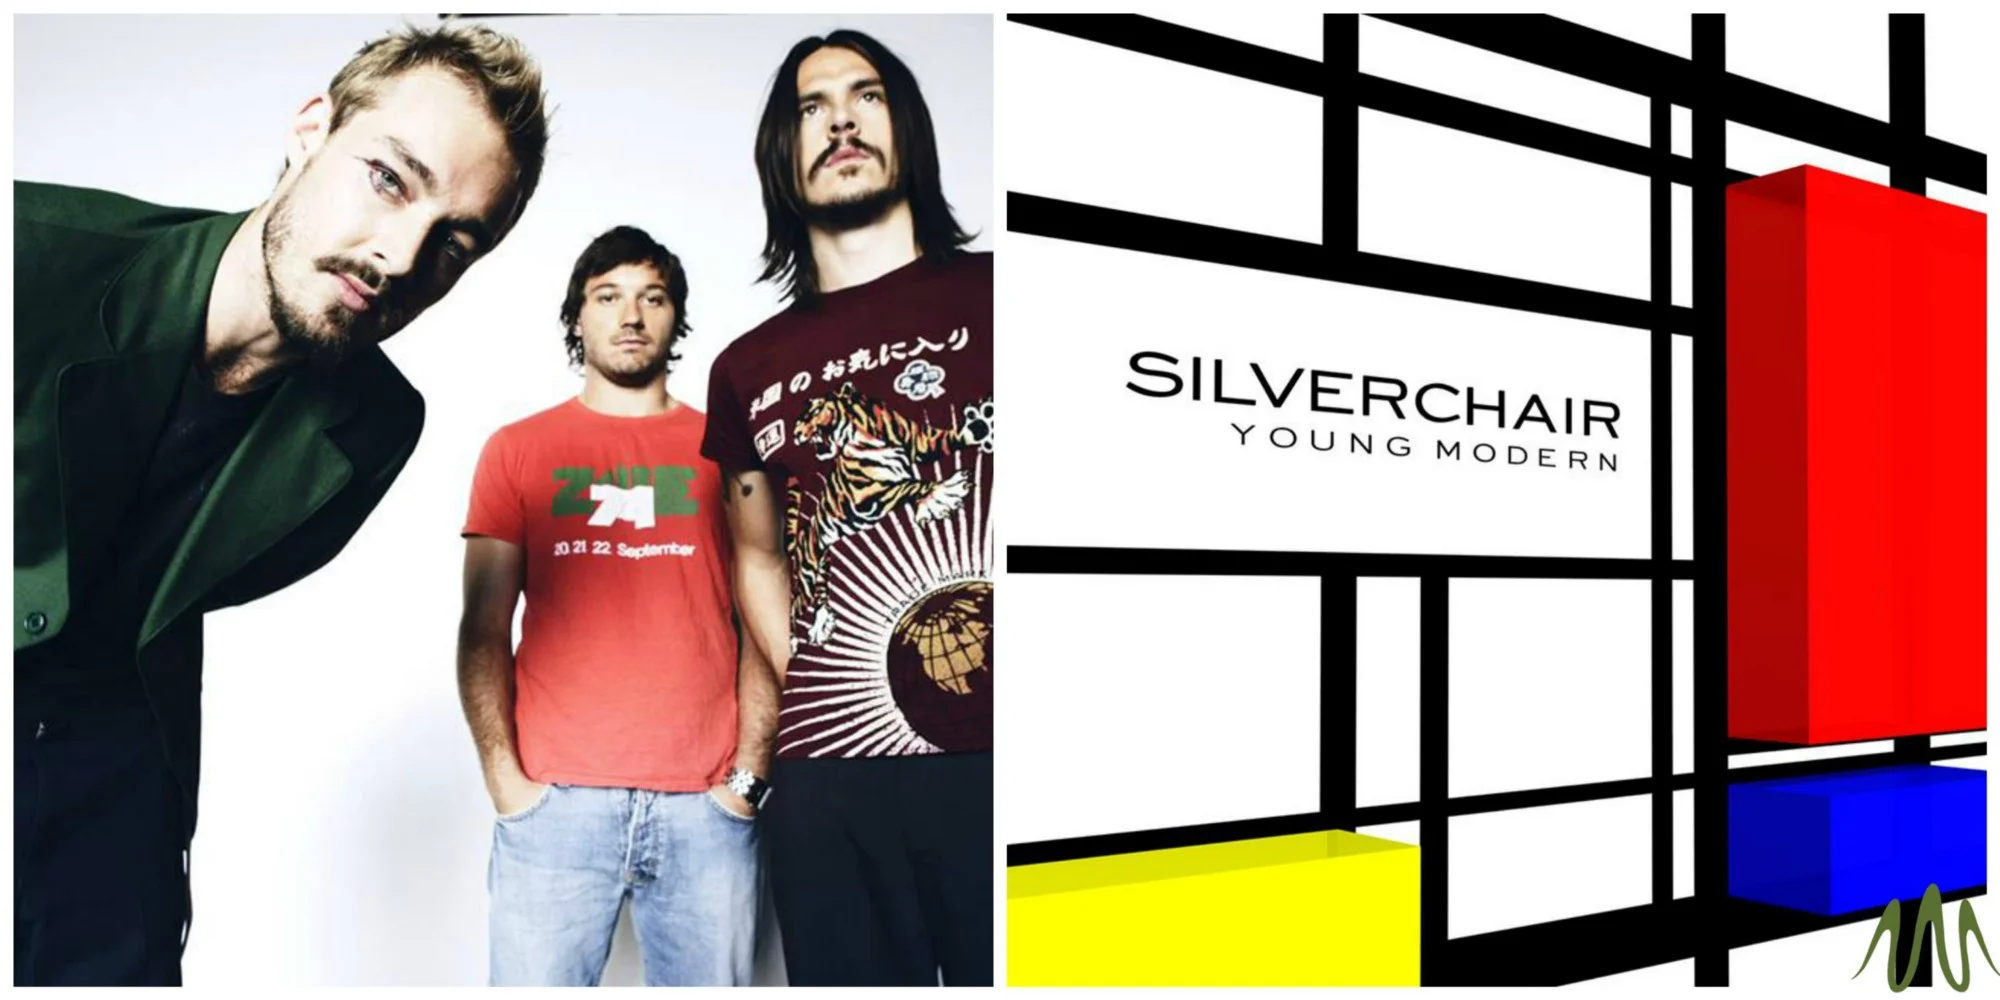 Silverchair Roundtable: Discussing Their Last Album, ‘Young Modern’ — 10 Years Later